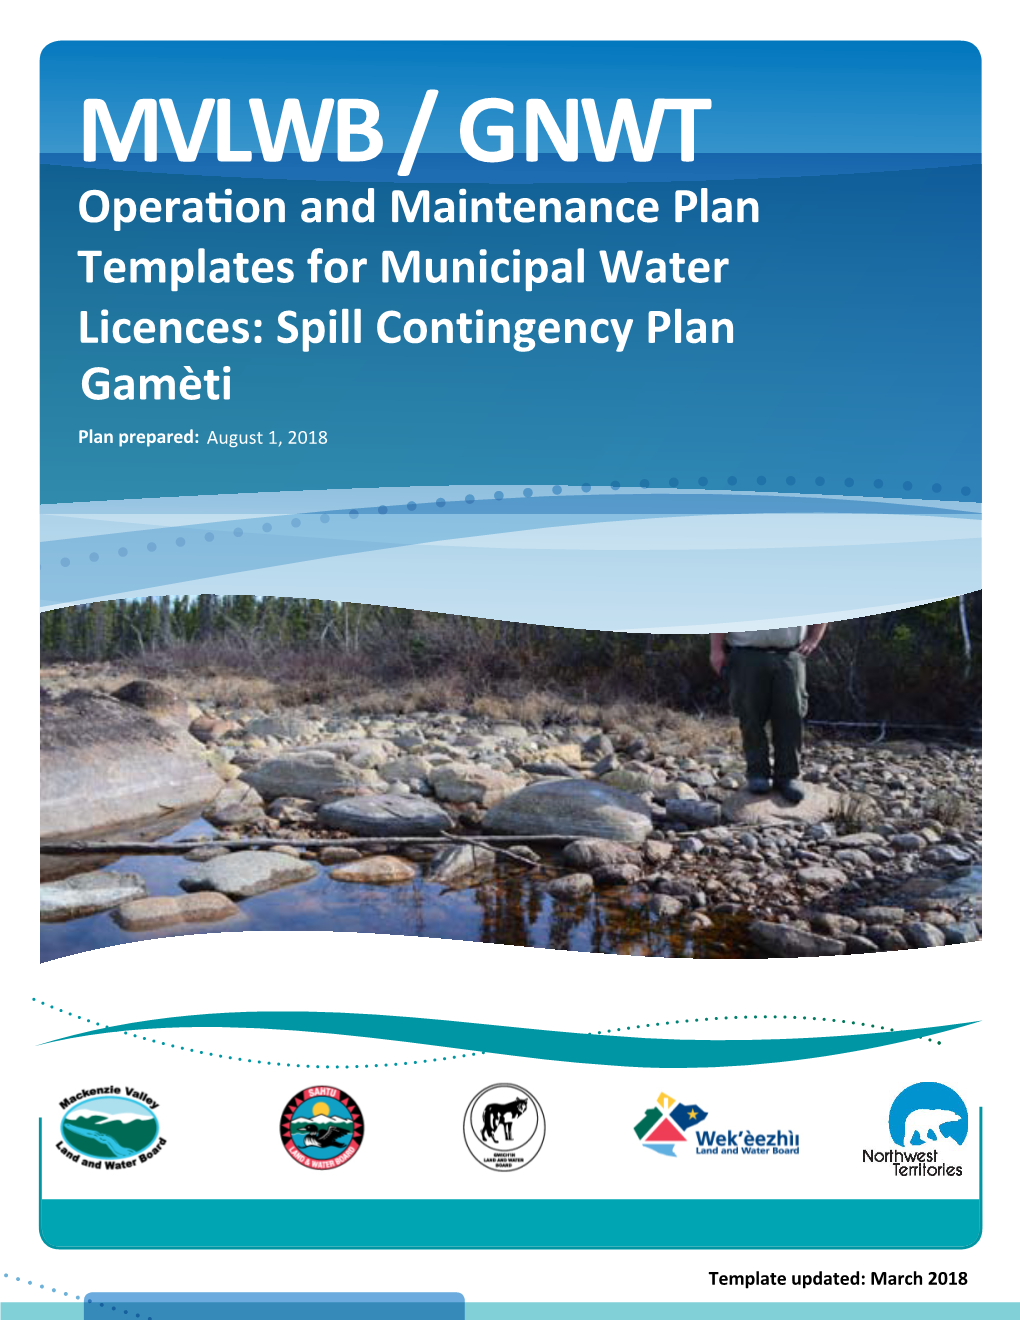 MVLWB / GNWT Operation and Maintenance Plan Templates for Municipal Water Licences: Spill Contingency Plan